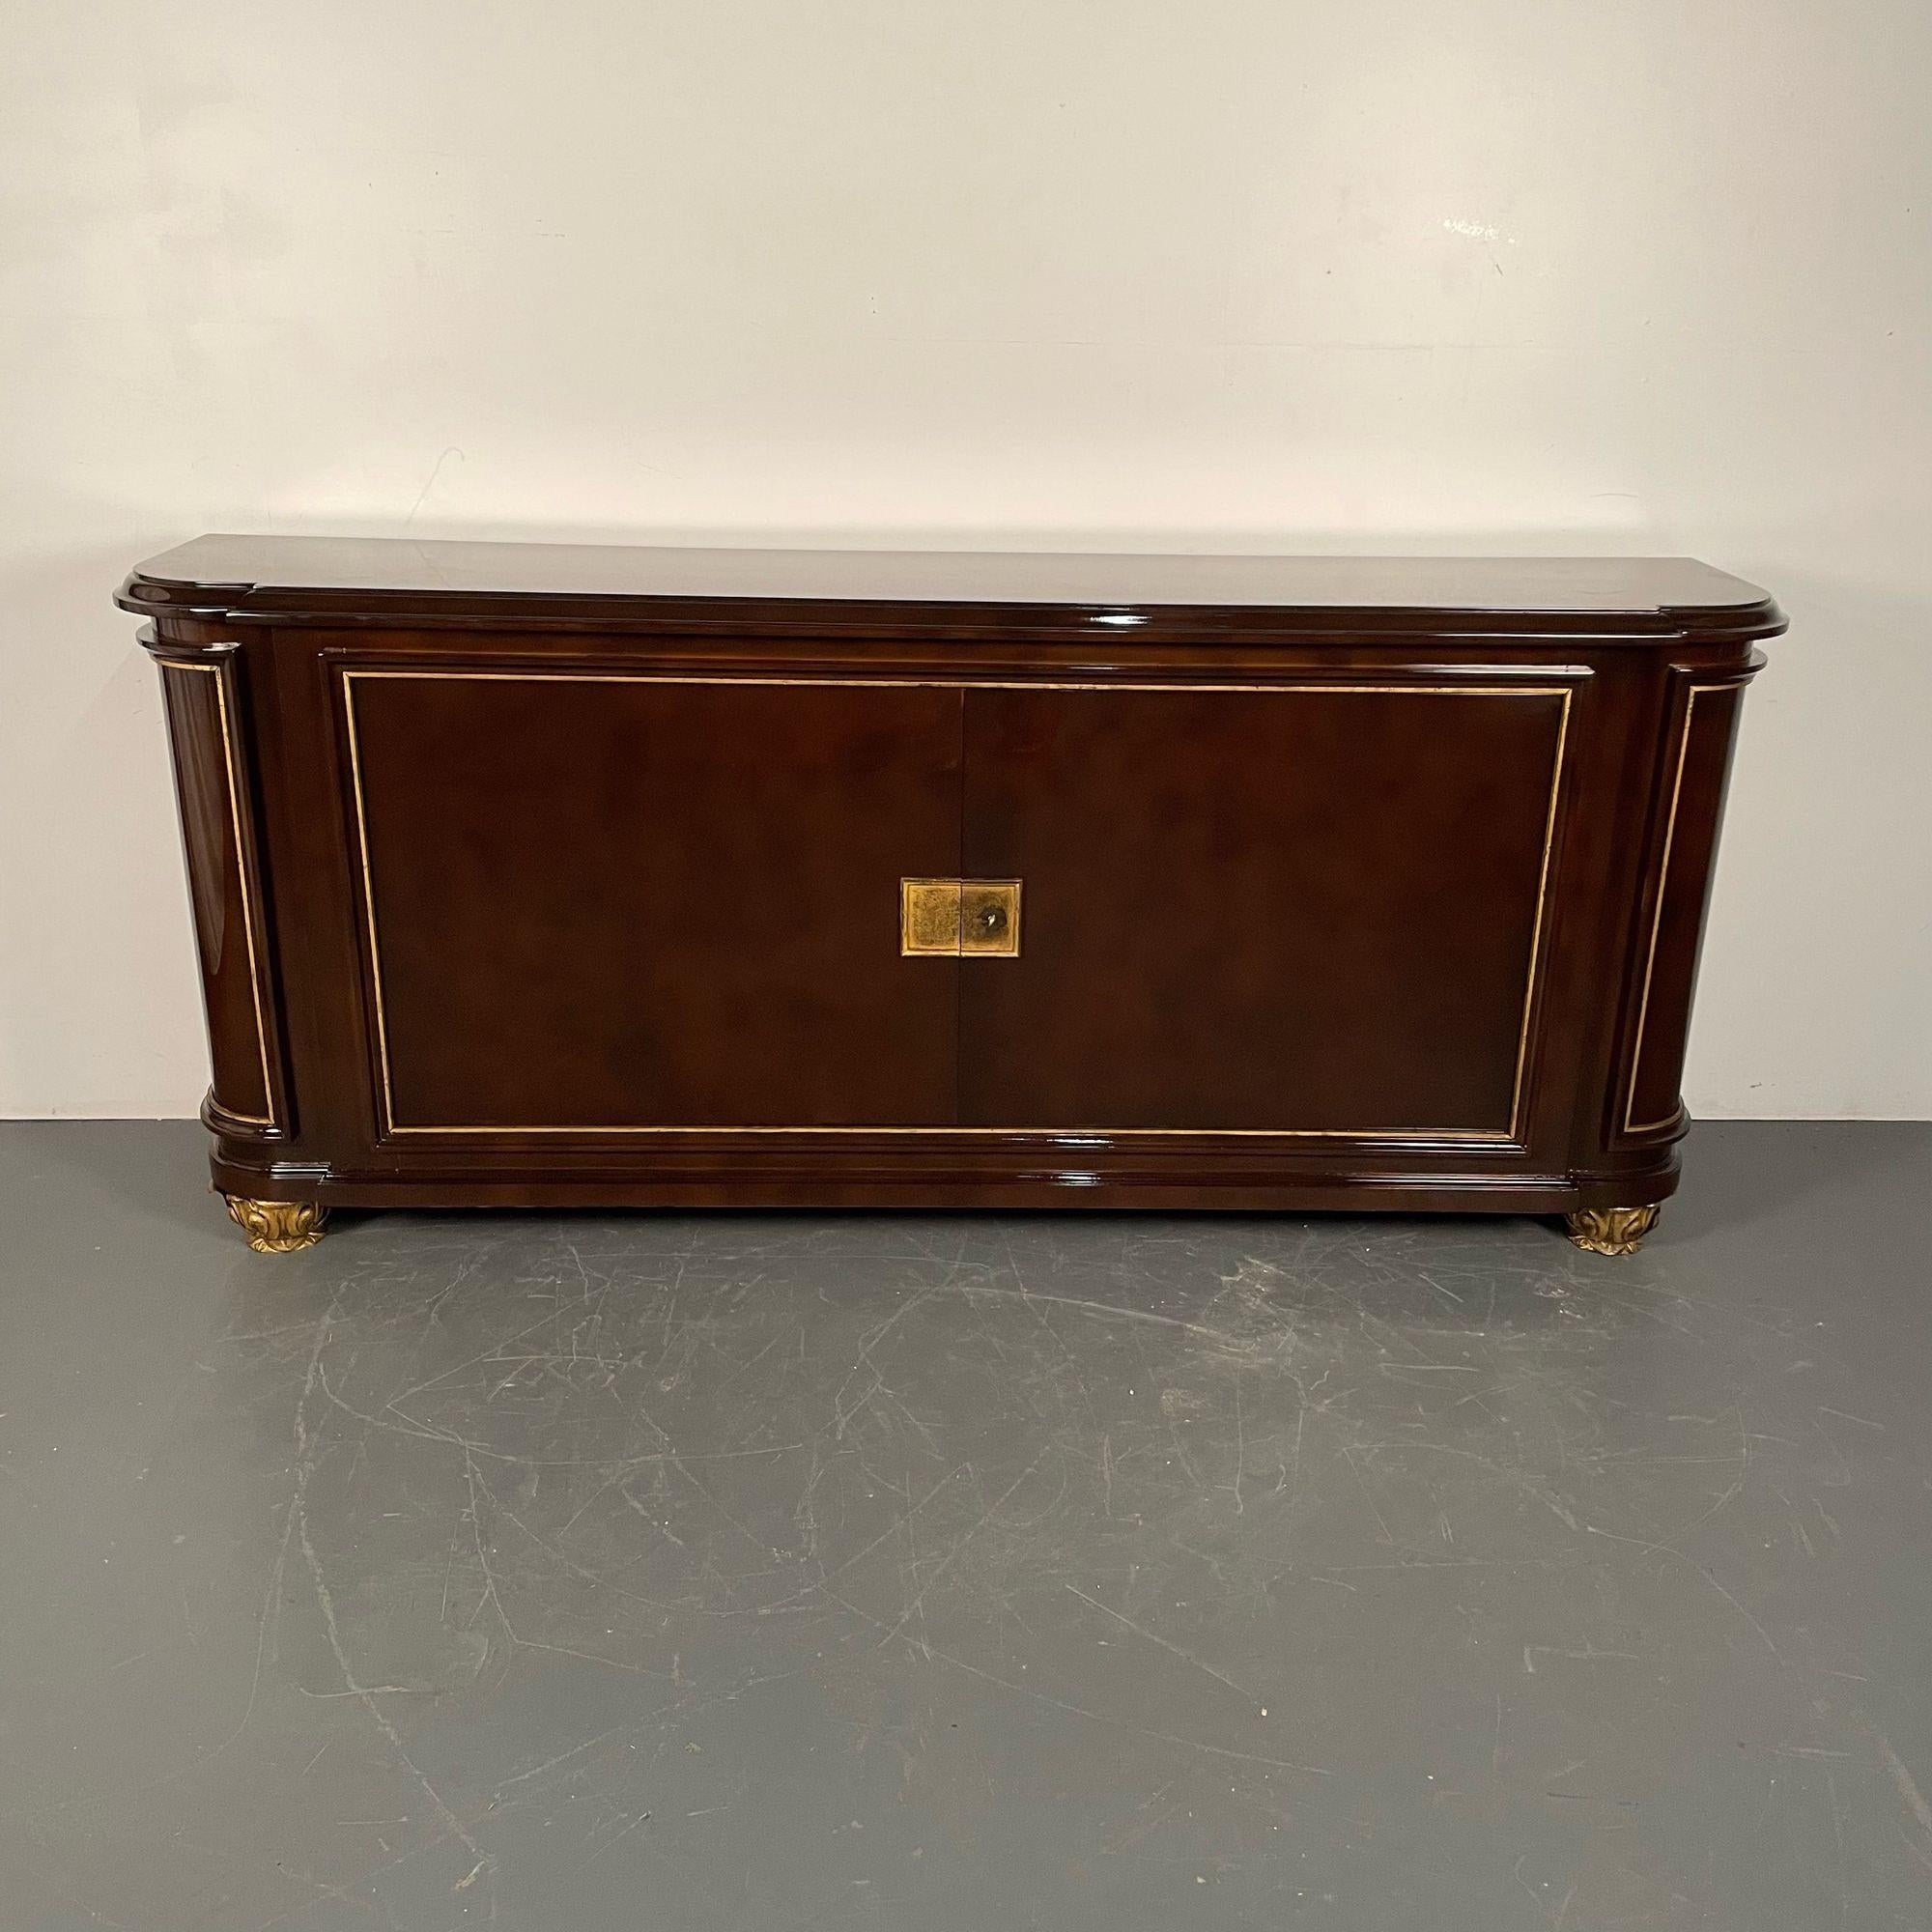 Rene Drouet, French Art Deco, Sideboard, Brown Lacquer, Gilt, France, 1940s For Sale 15